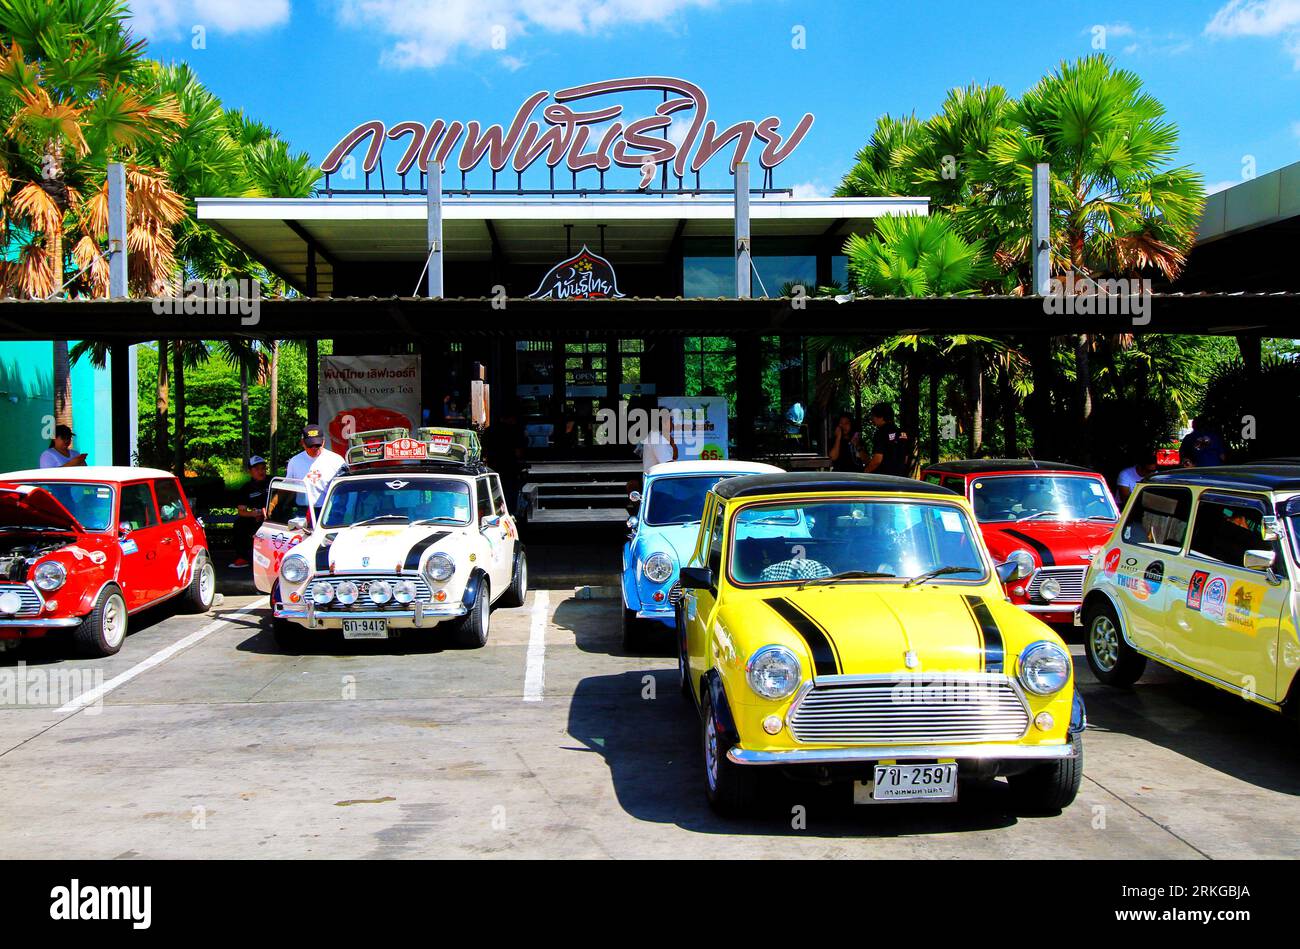 An array of vintage Mini Austin Coopers in a variety of colors are parked along the side of a street Stock Photo